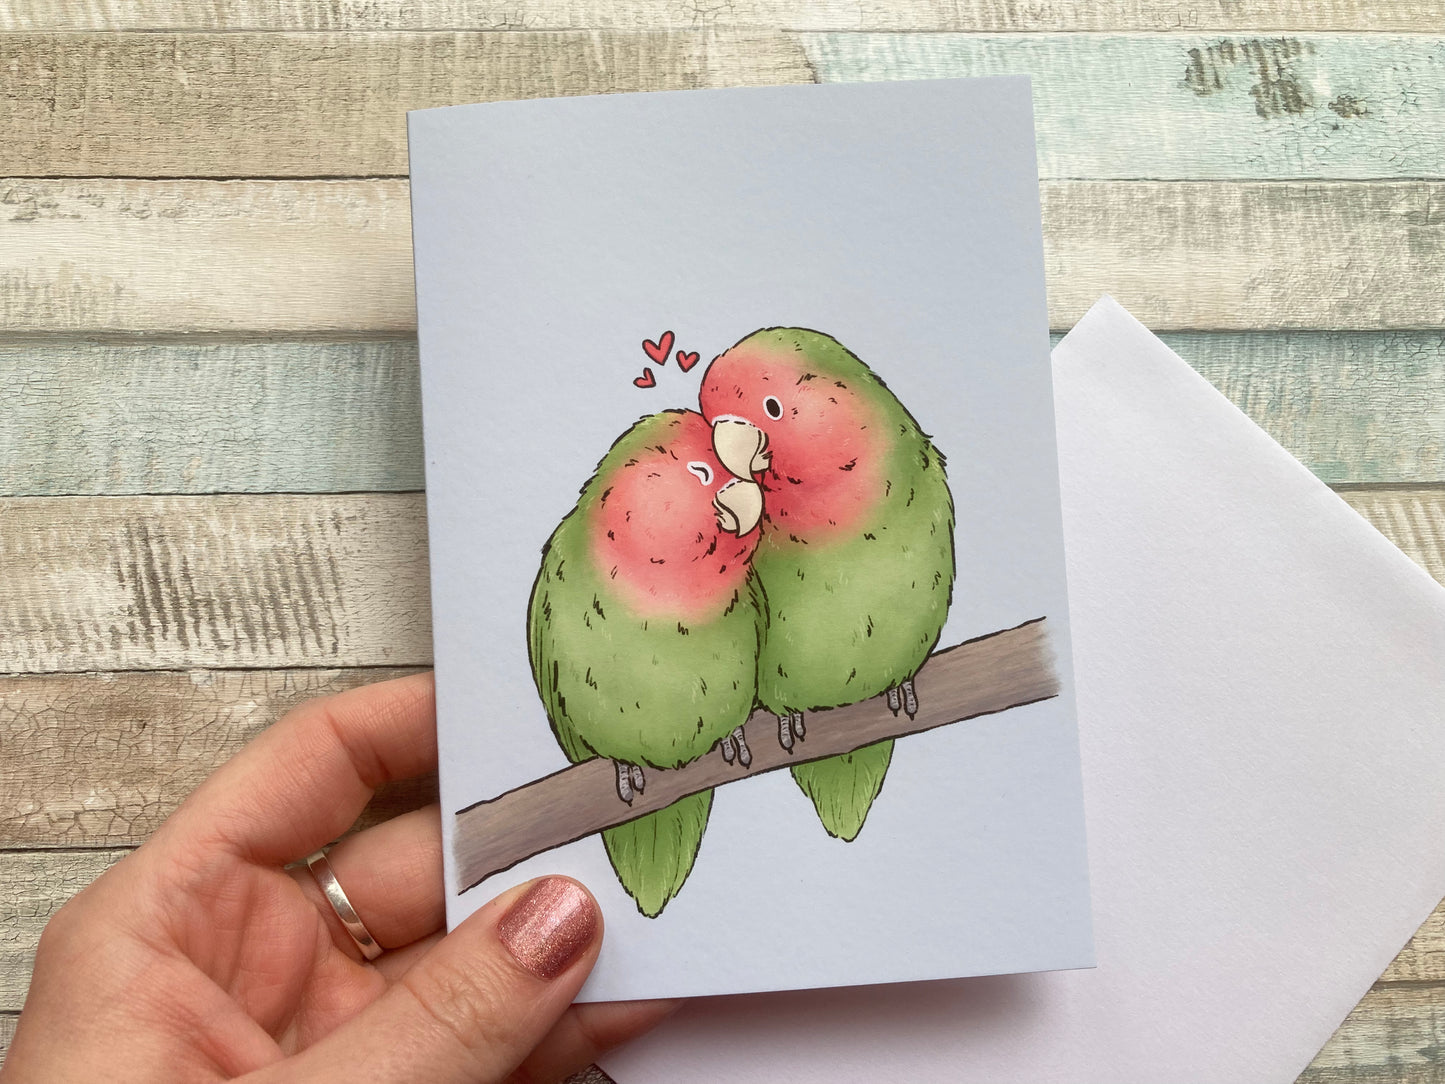 Lovebird Greeting Card, A6 Size, Couples card, blank greeting card, with white envelope, blue background, parrot love illustration